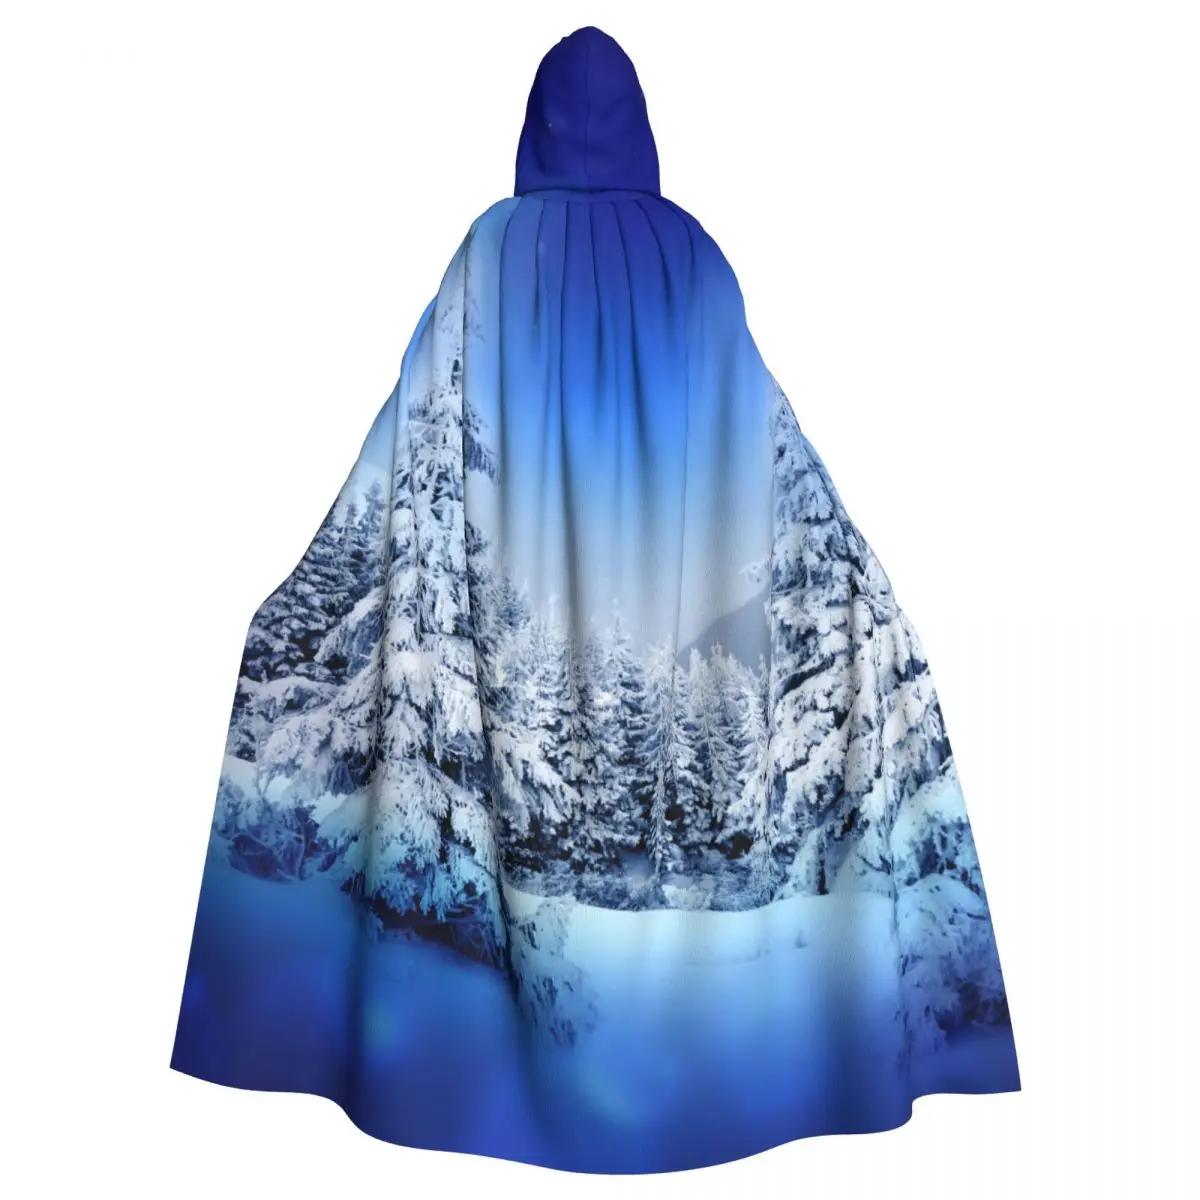 

Hooded Cloak Unisex Cloak with Hood Winter Night In Fairy Snowy Fir Forest With Starry Cloak Vampire Witch Cape Cosplay Costume